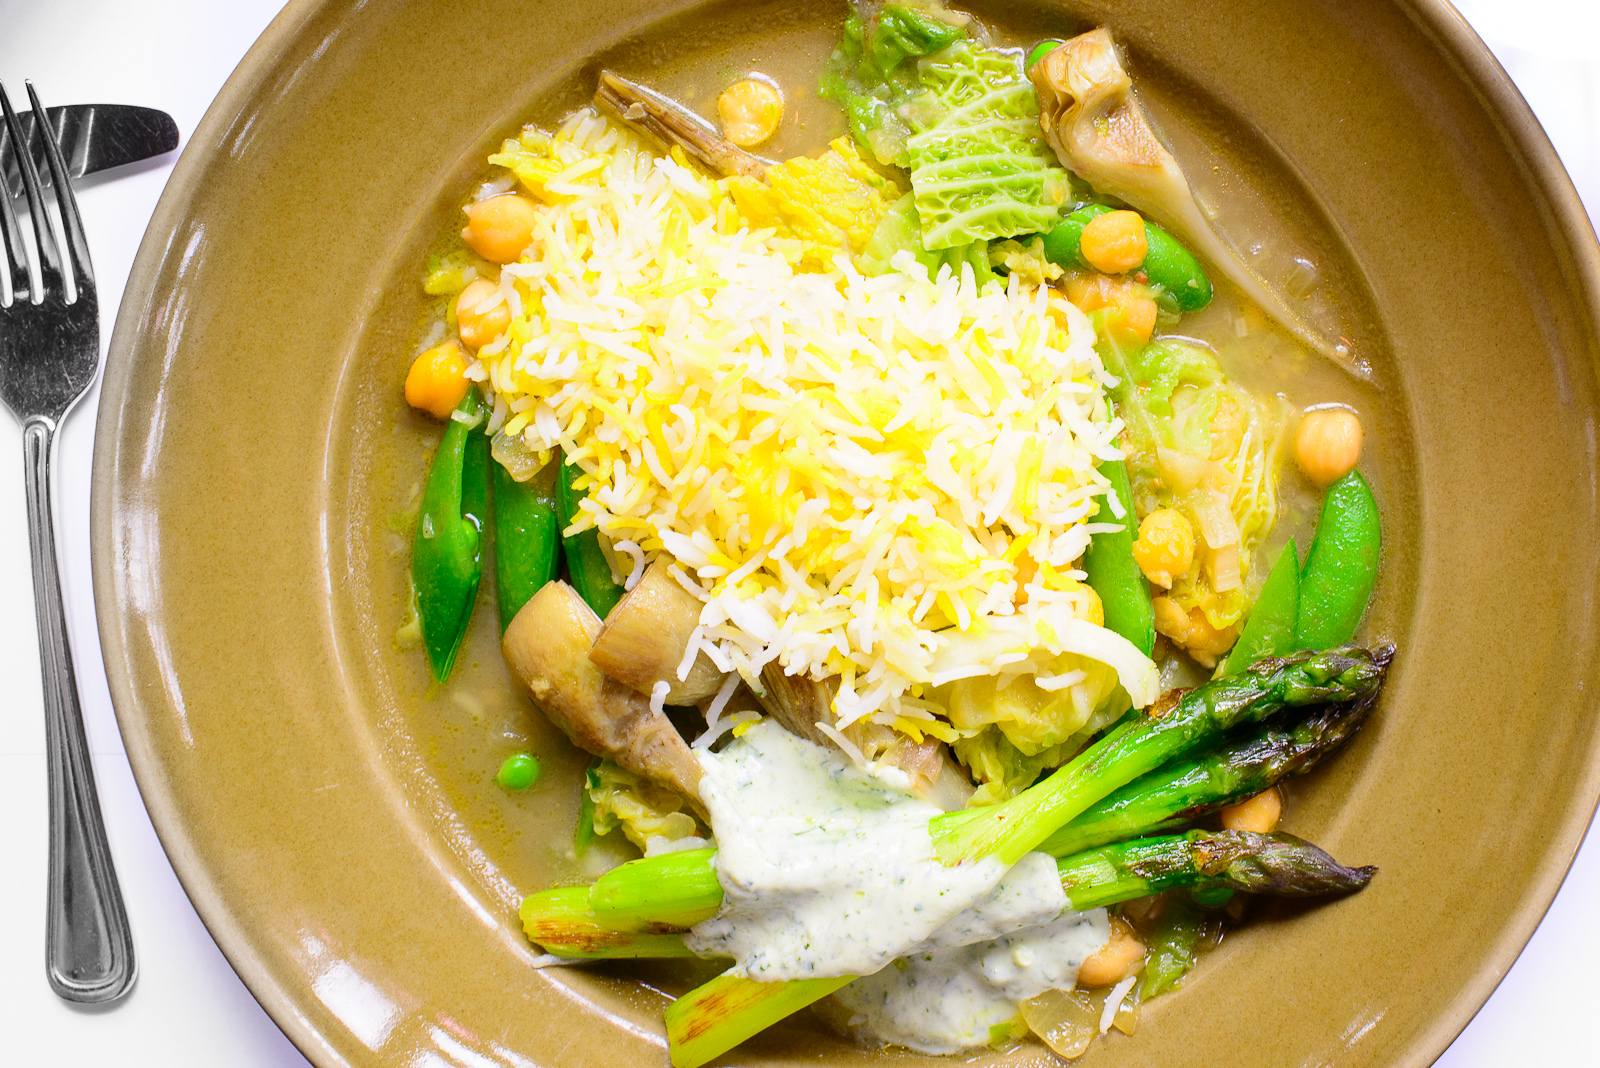 Spring vegetable stew with saffron rice, chickpeas, and mint yog